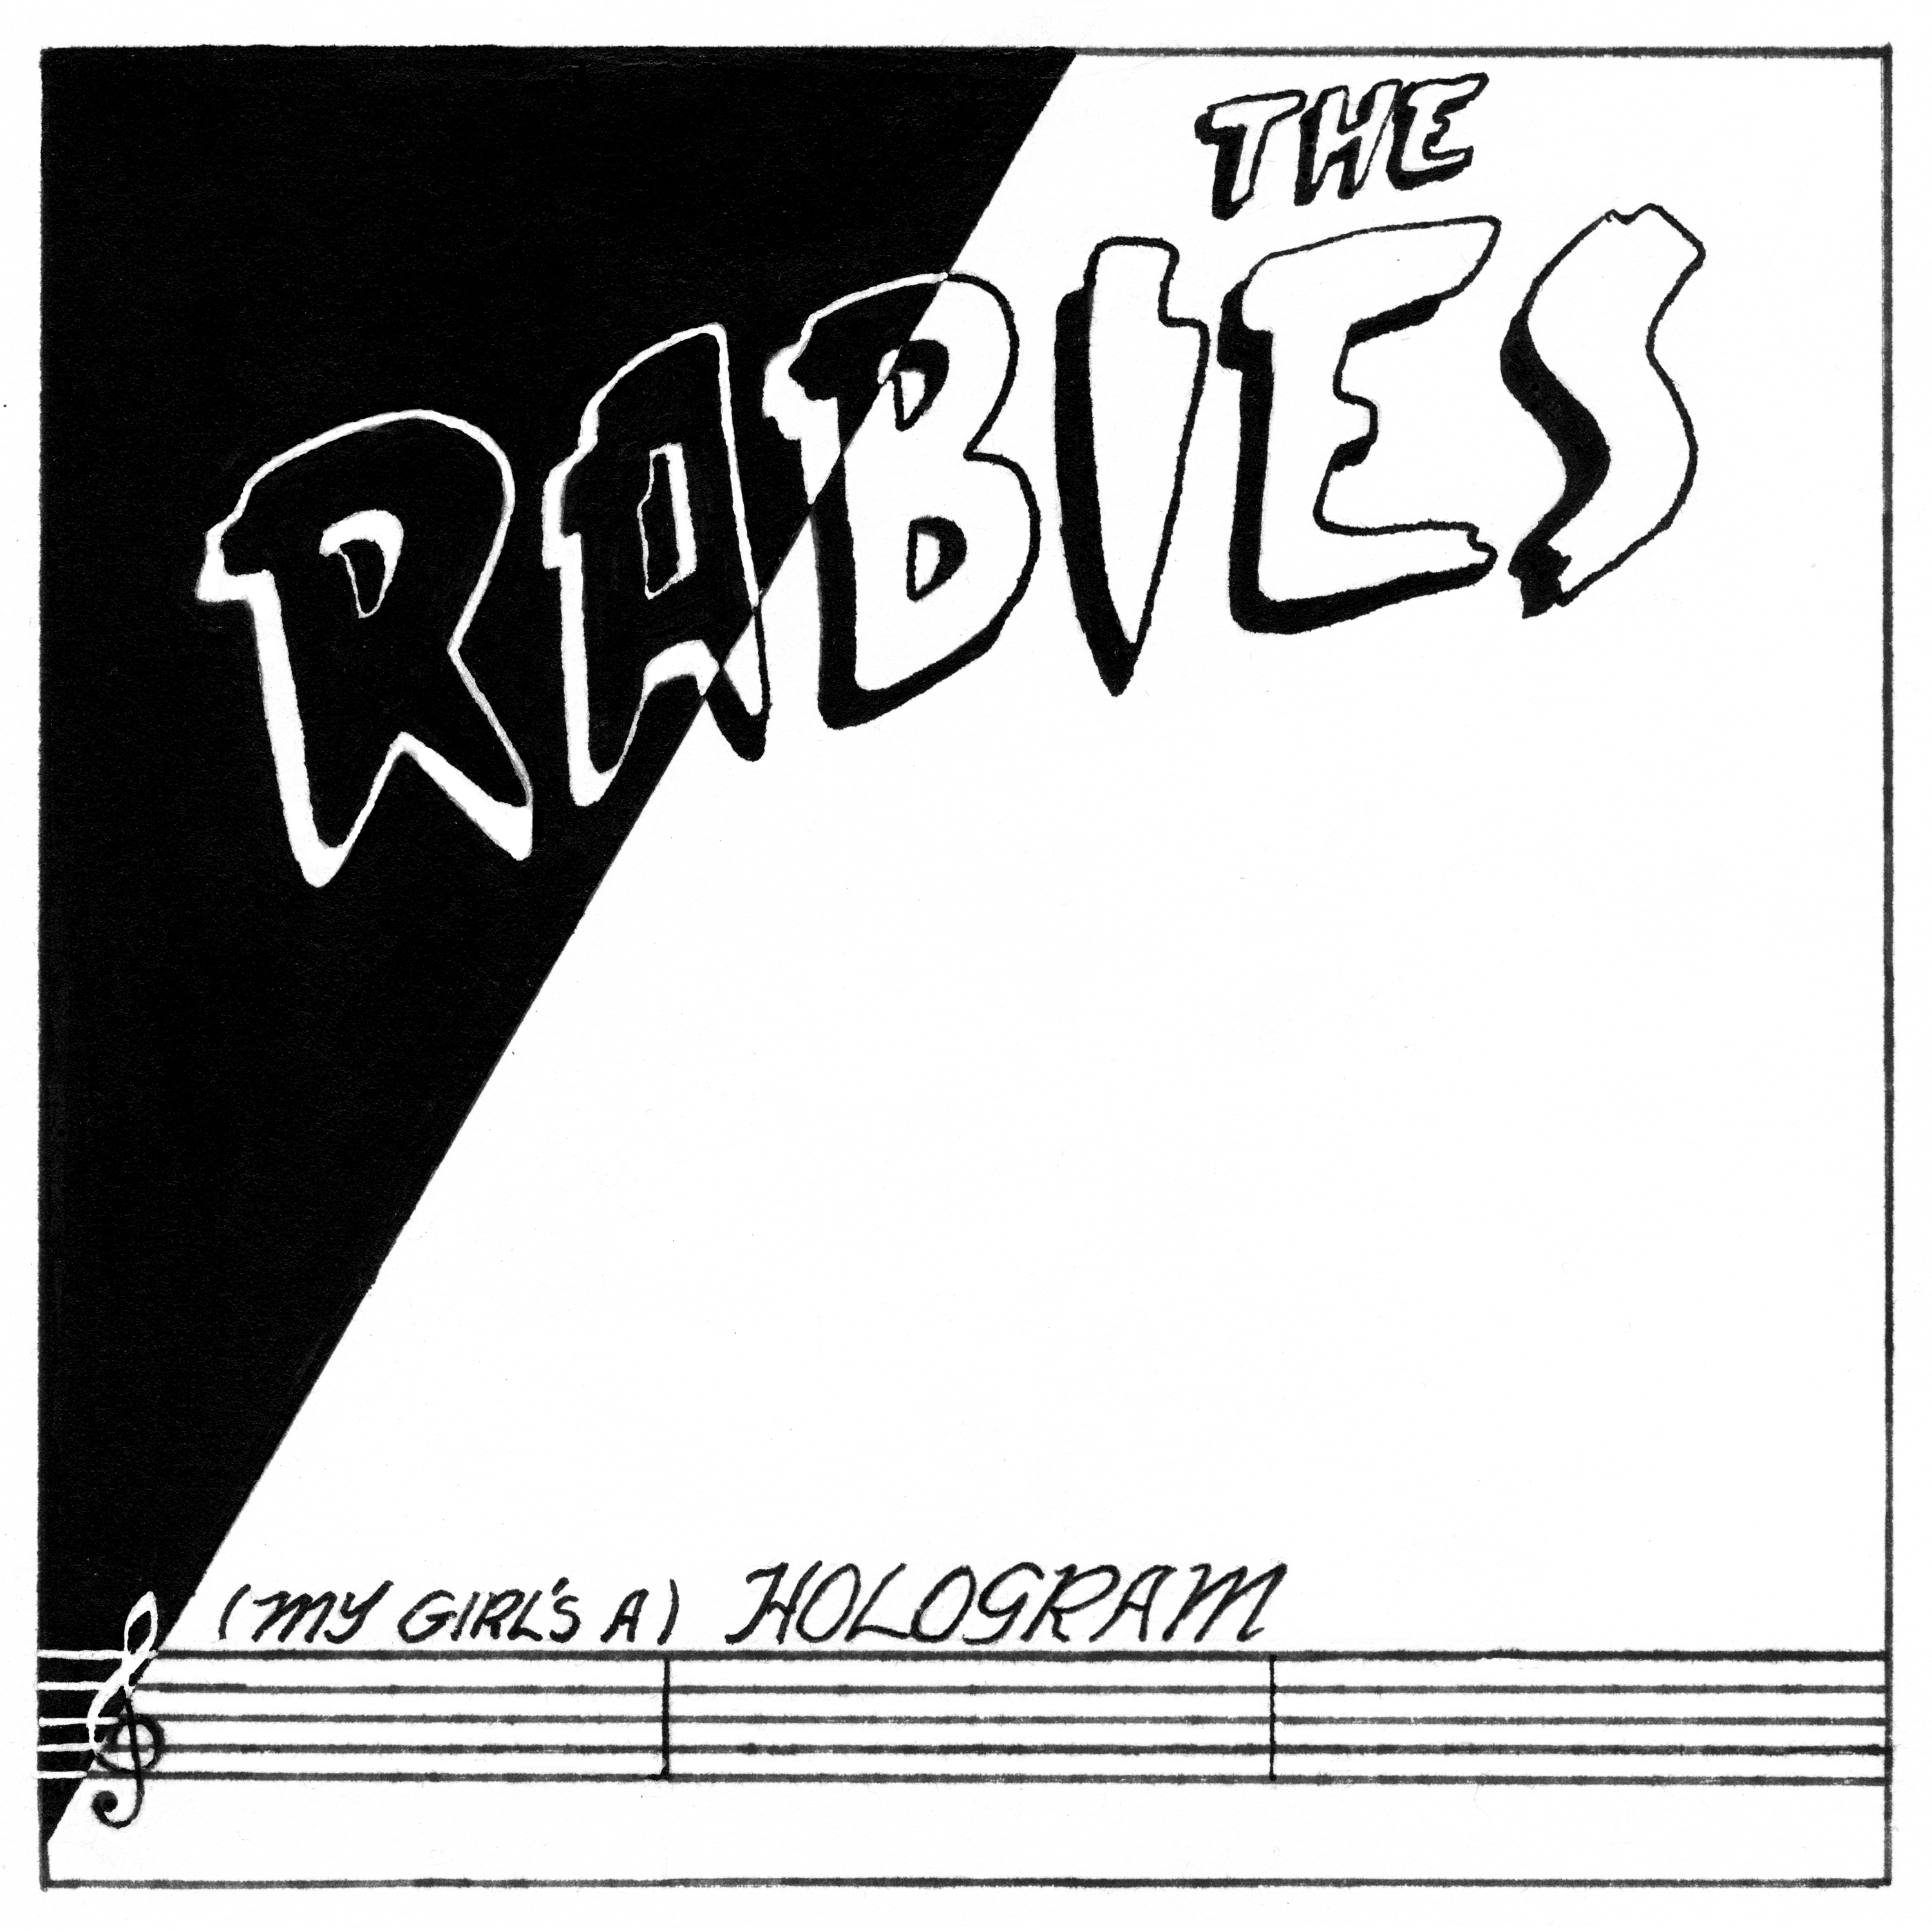 Rabies Hologram Cover 3000